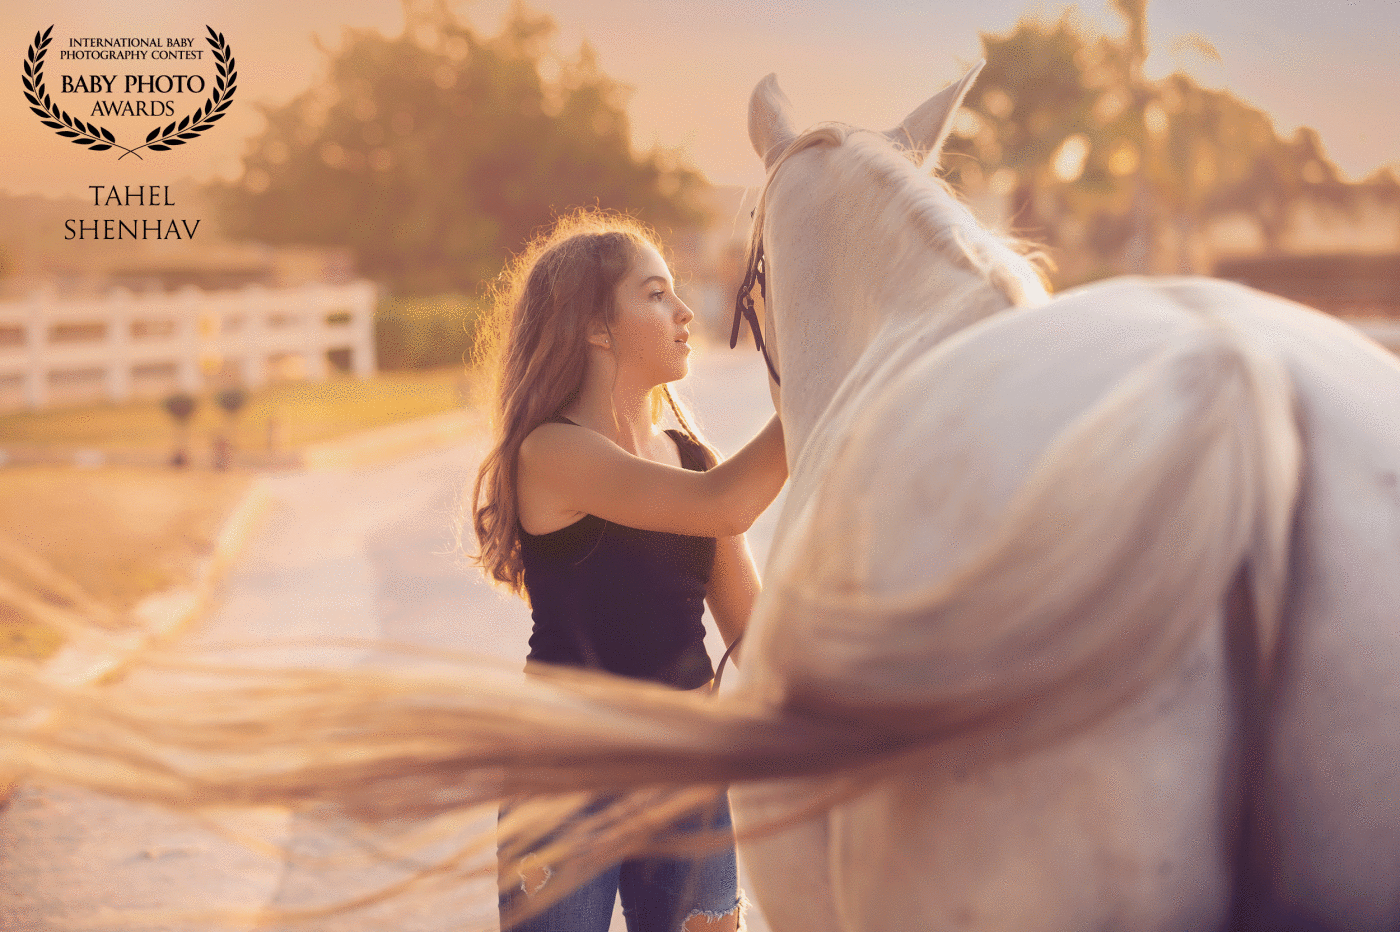 Horse. I heard about Emanuel's love for horses from our first conversation, even before we chose locations for her photos, one thing was clear: the photoshoots would include her horse. I think her love for the horse can not be missed in this picture either. What do you think?